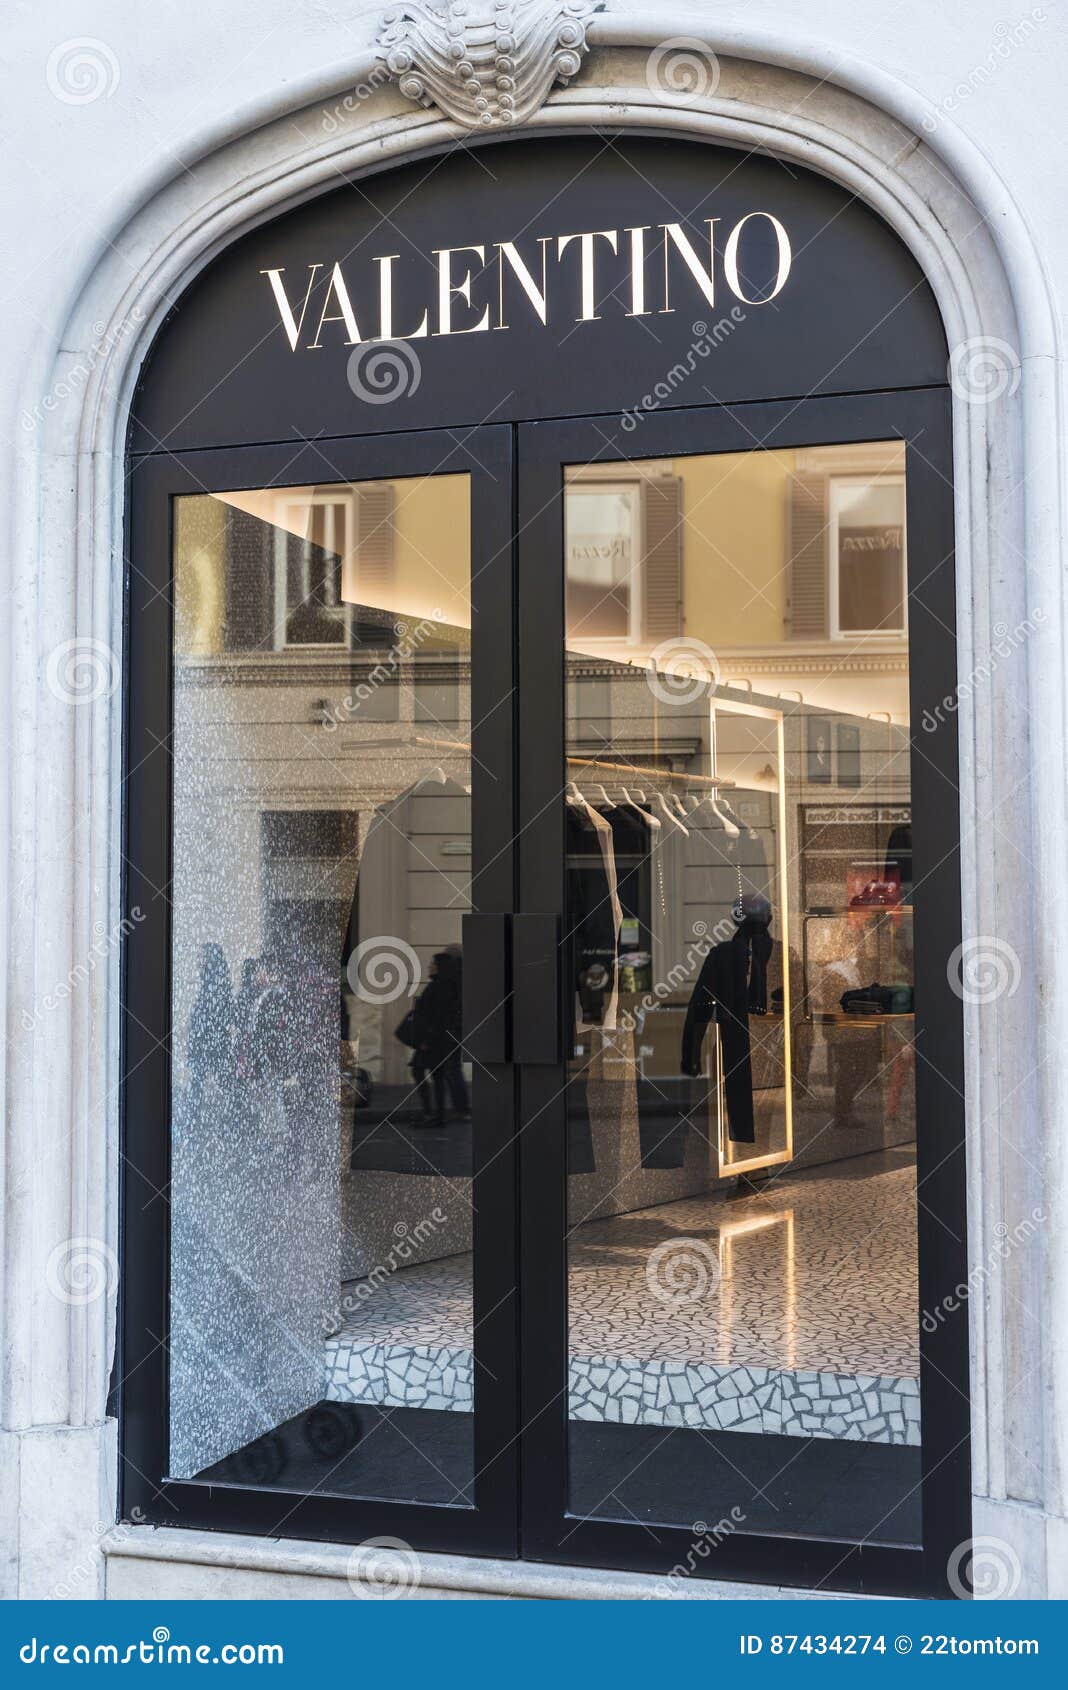 Valentino Shop in Rome, Italy Editorial Stock Image - Image of showcase, shopping: